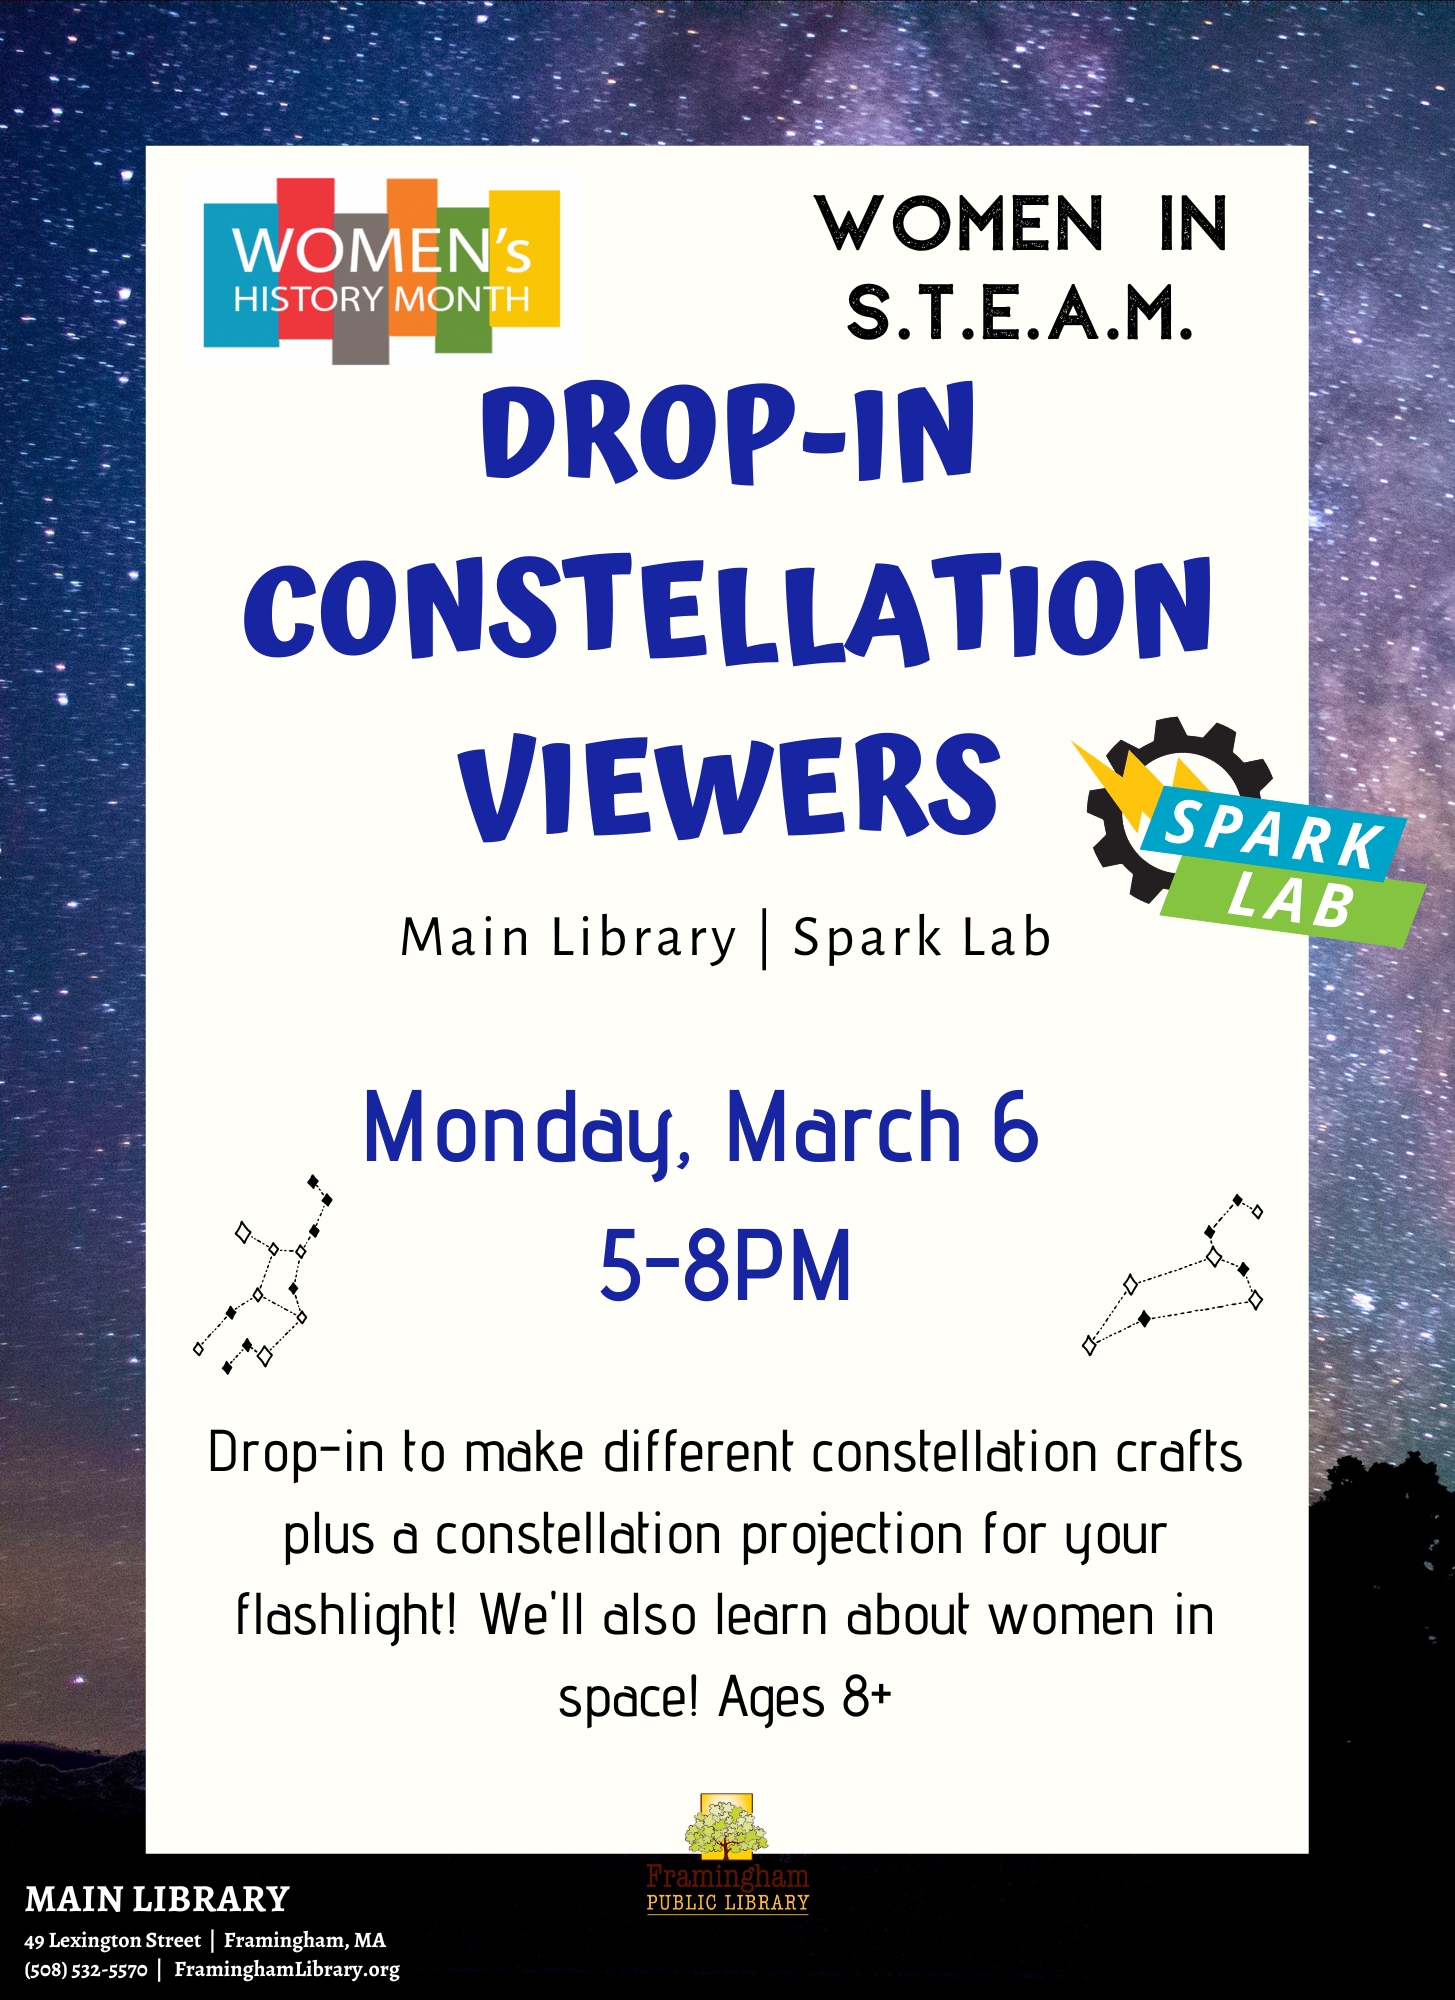 Women in S.T.E.A.M: Drop-In Constellation Building thumbnail Photo